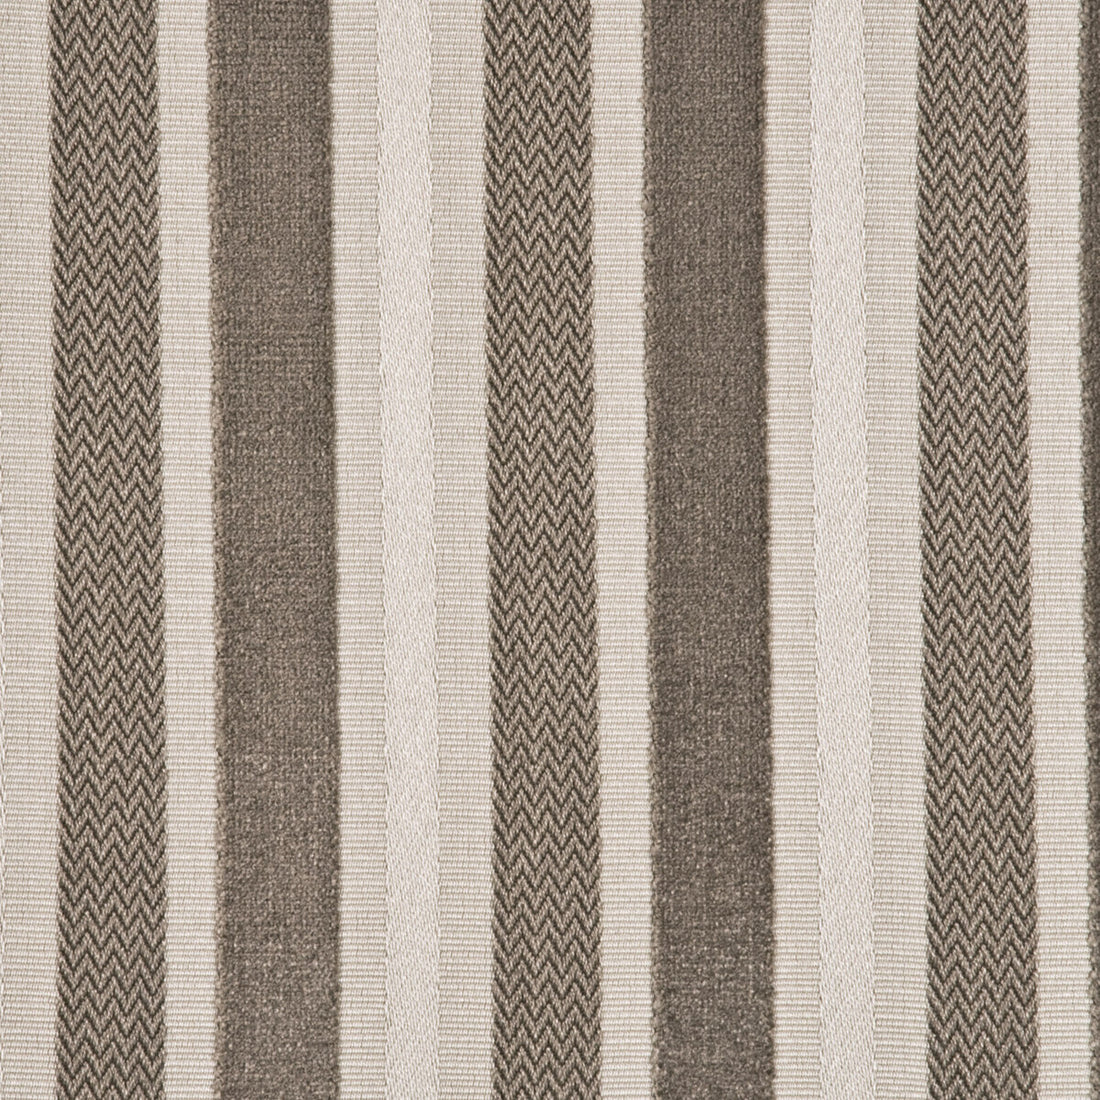 Marwood Stripe fabric in taupe color - pattern BF10449.210.0 - by G P &amp; J Baker in the Marwood Velvets collection